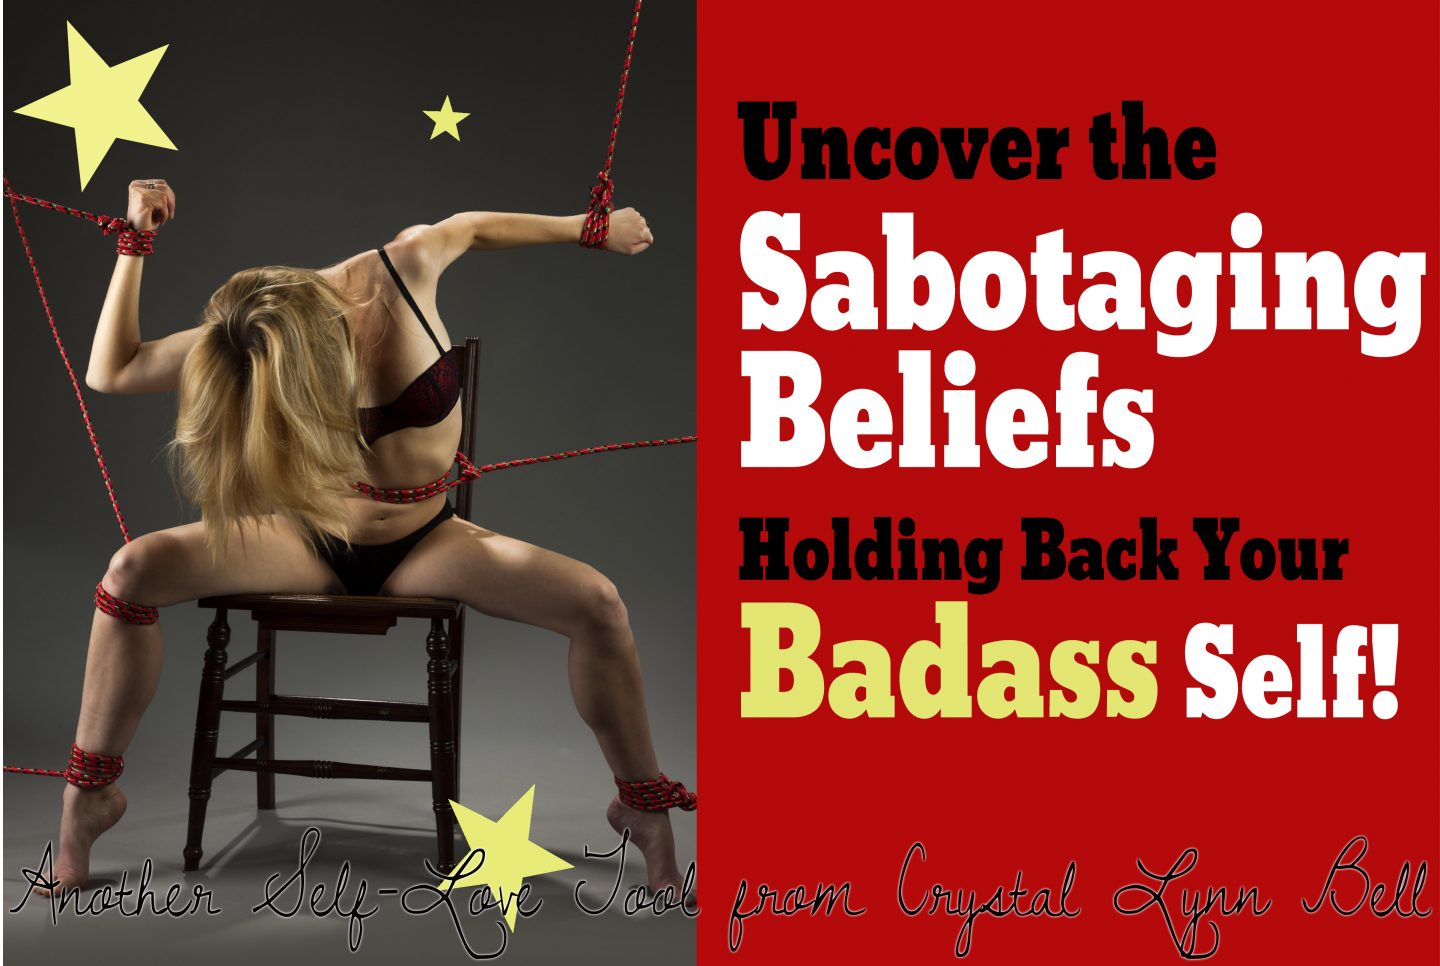 Uncover the Sabotaging Beliefs Holding Back Your Badass Self